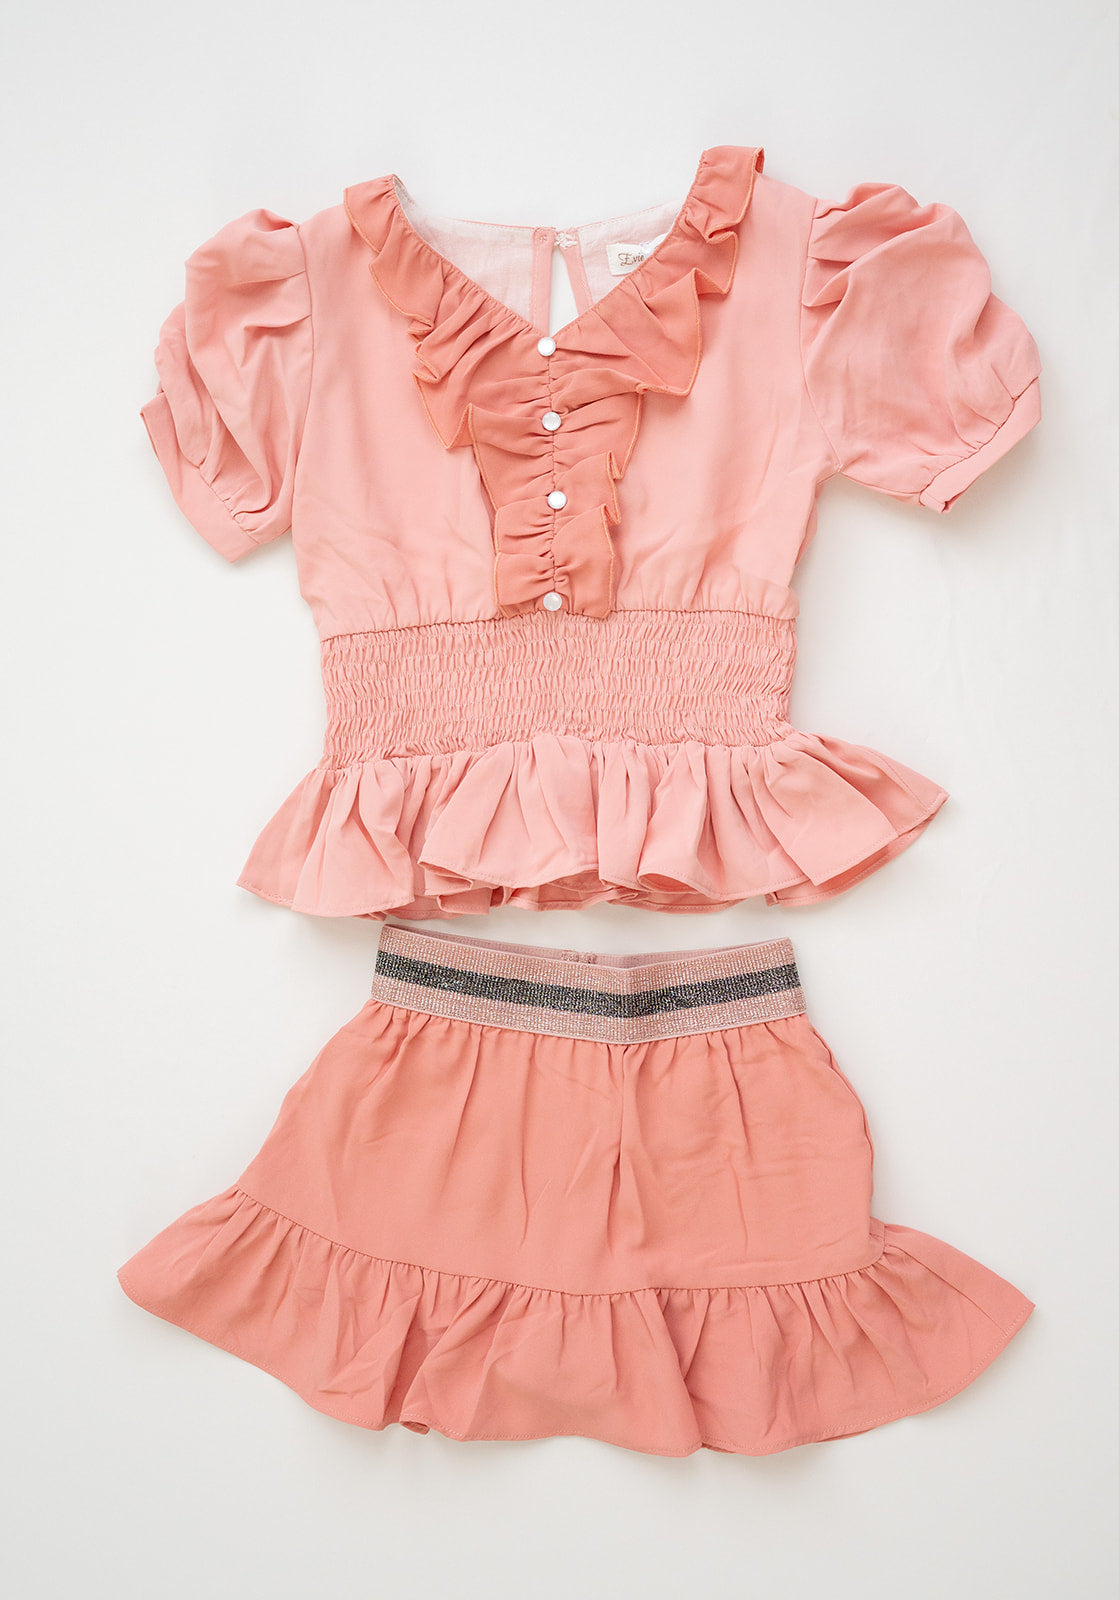 The Lord's Promise Blush and Coral Ruffle Button Accent Peplum Smocked Top and Coordinating Stretchy Metallic Waist Skort